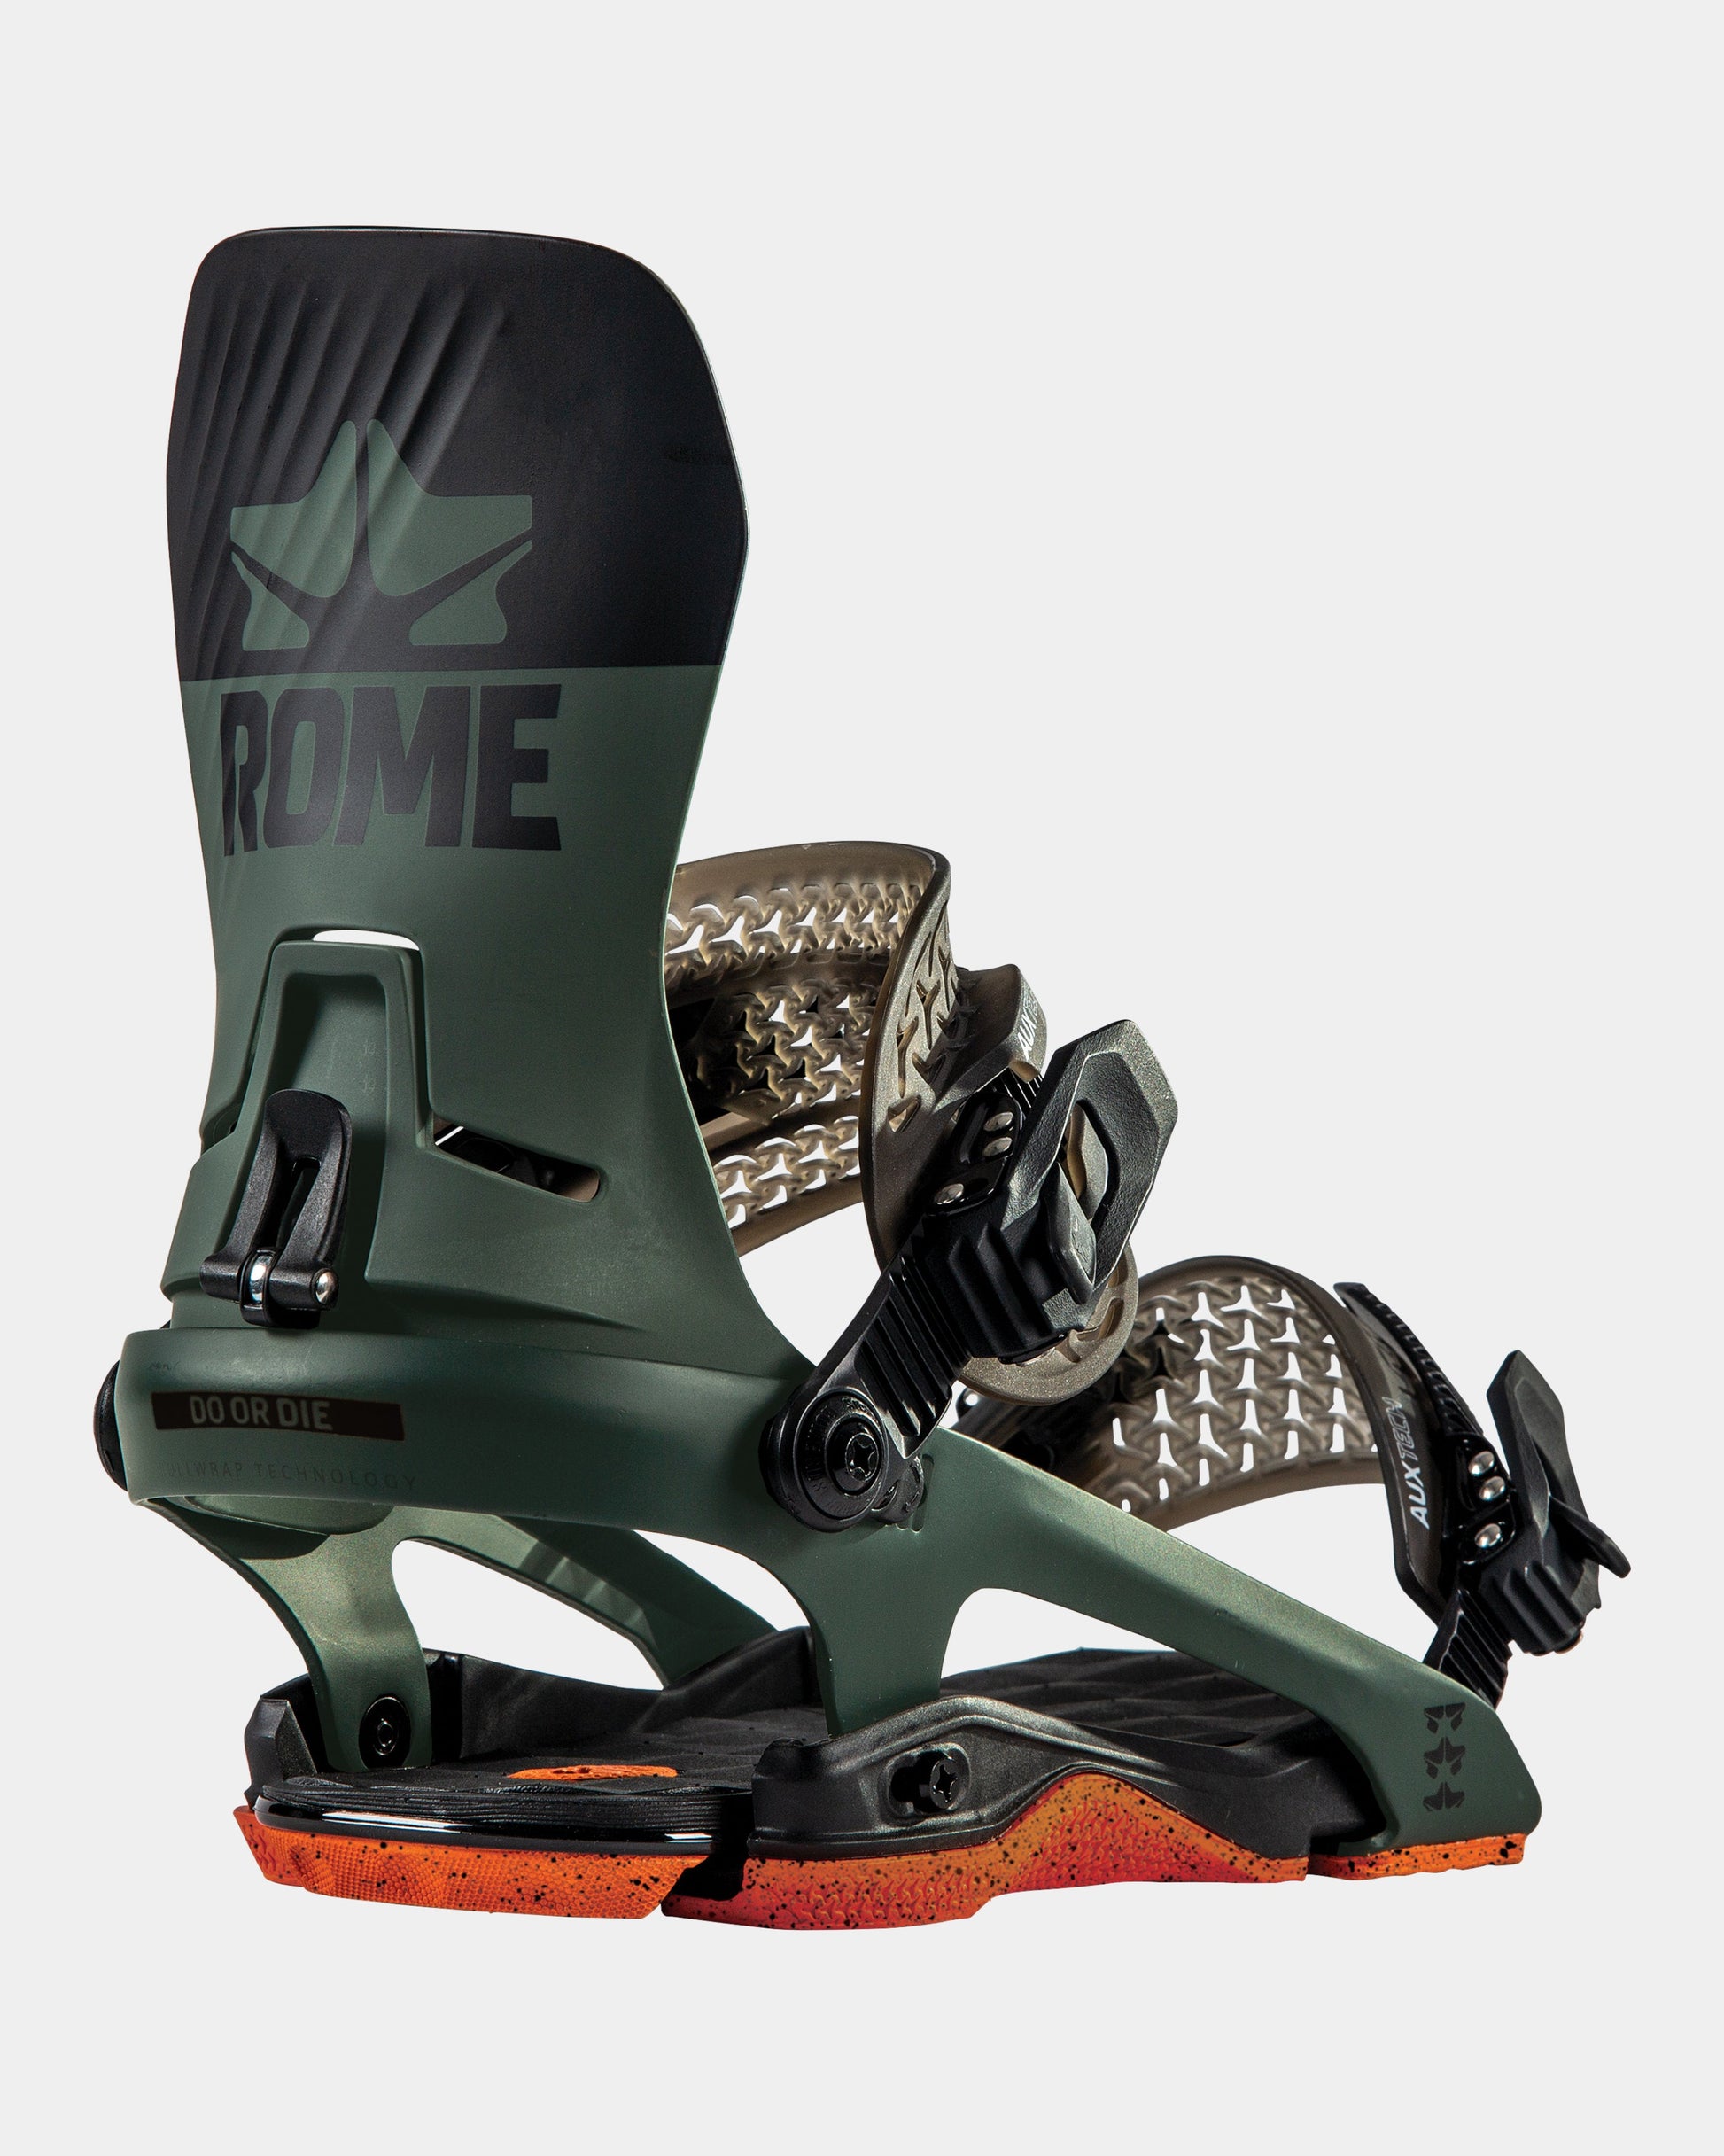 Rome dod 2023 rome bindings product photo from the back cover shot in the studio color hunter green